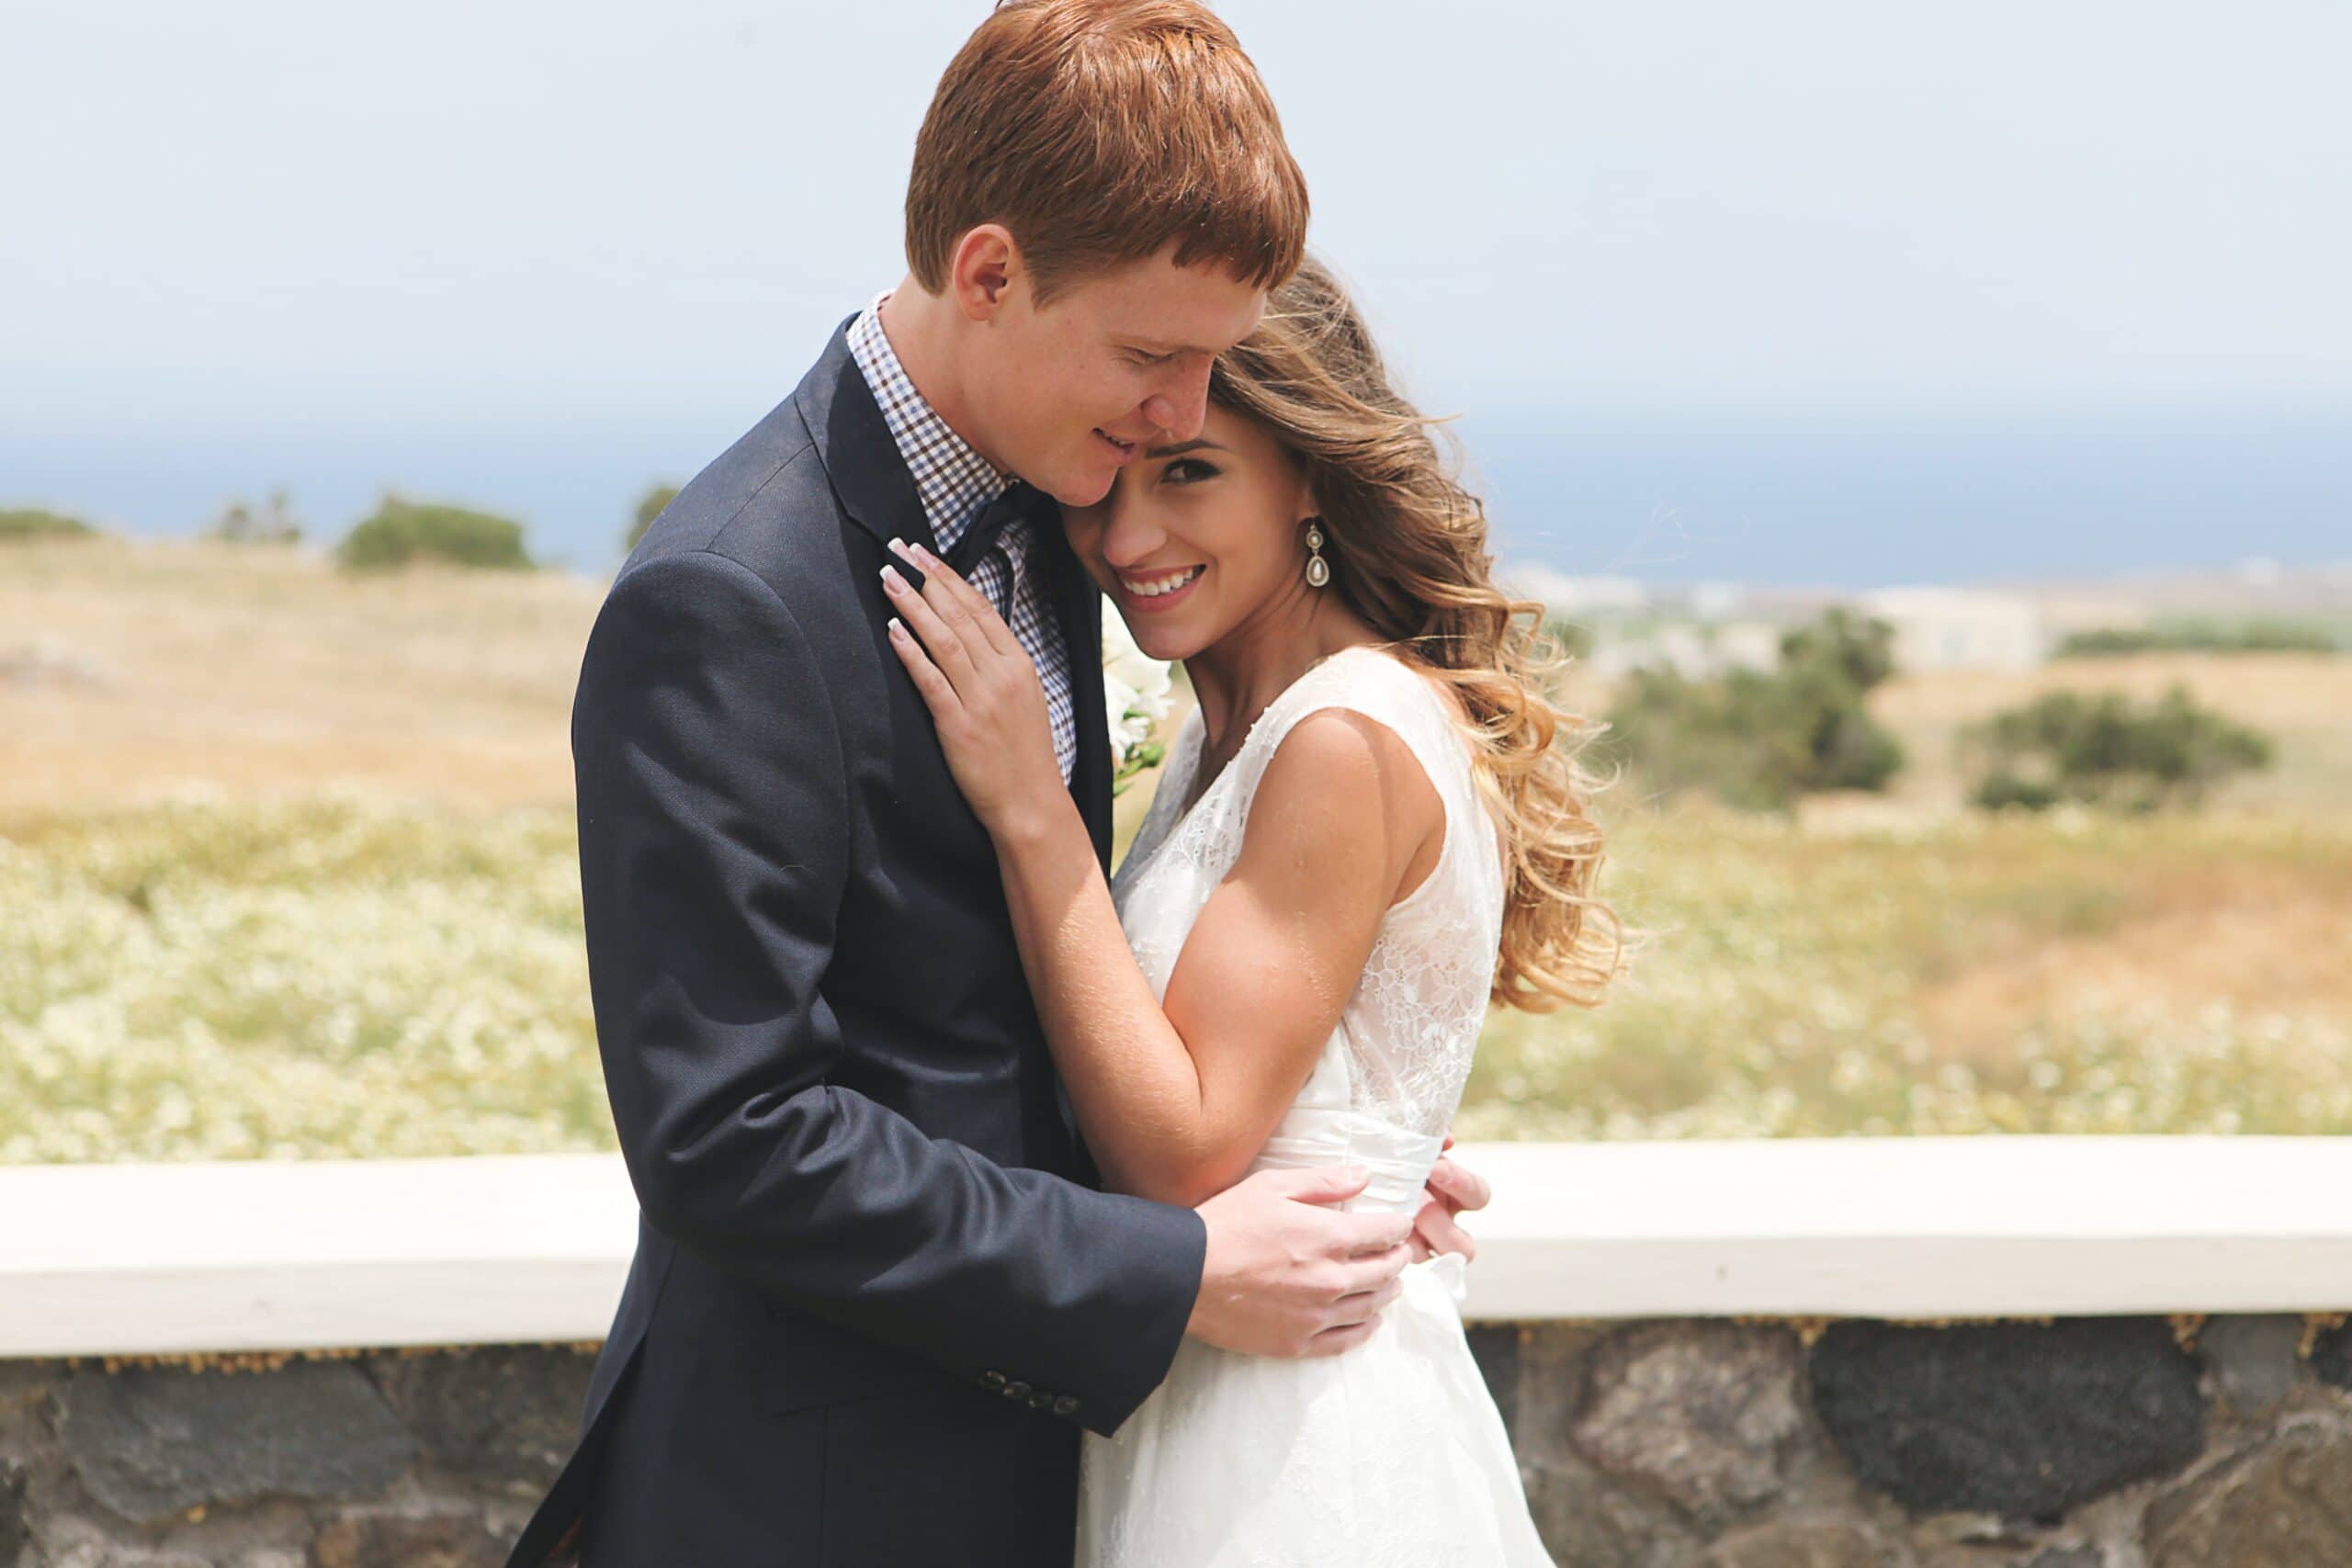 The bride and groom share an intimate embrace on their wedding day, filled with love and joy.